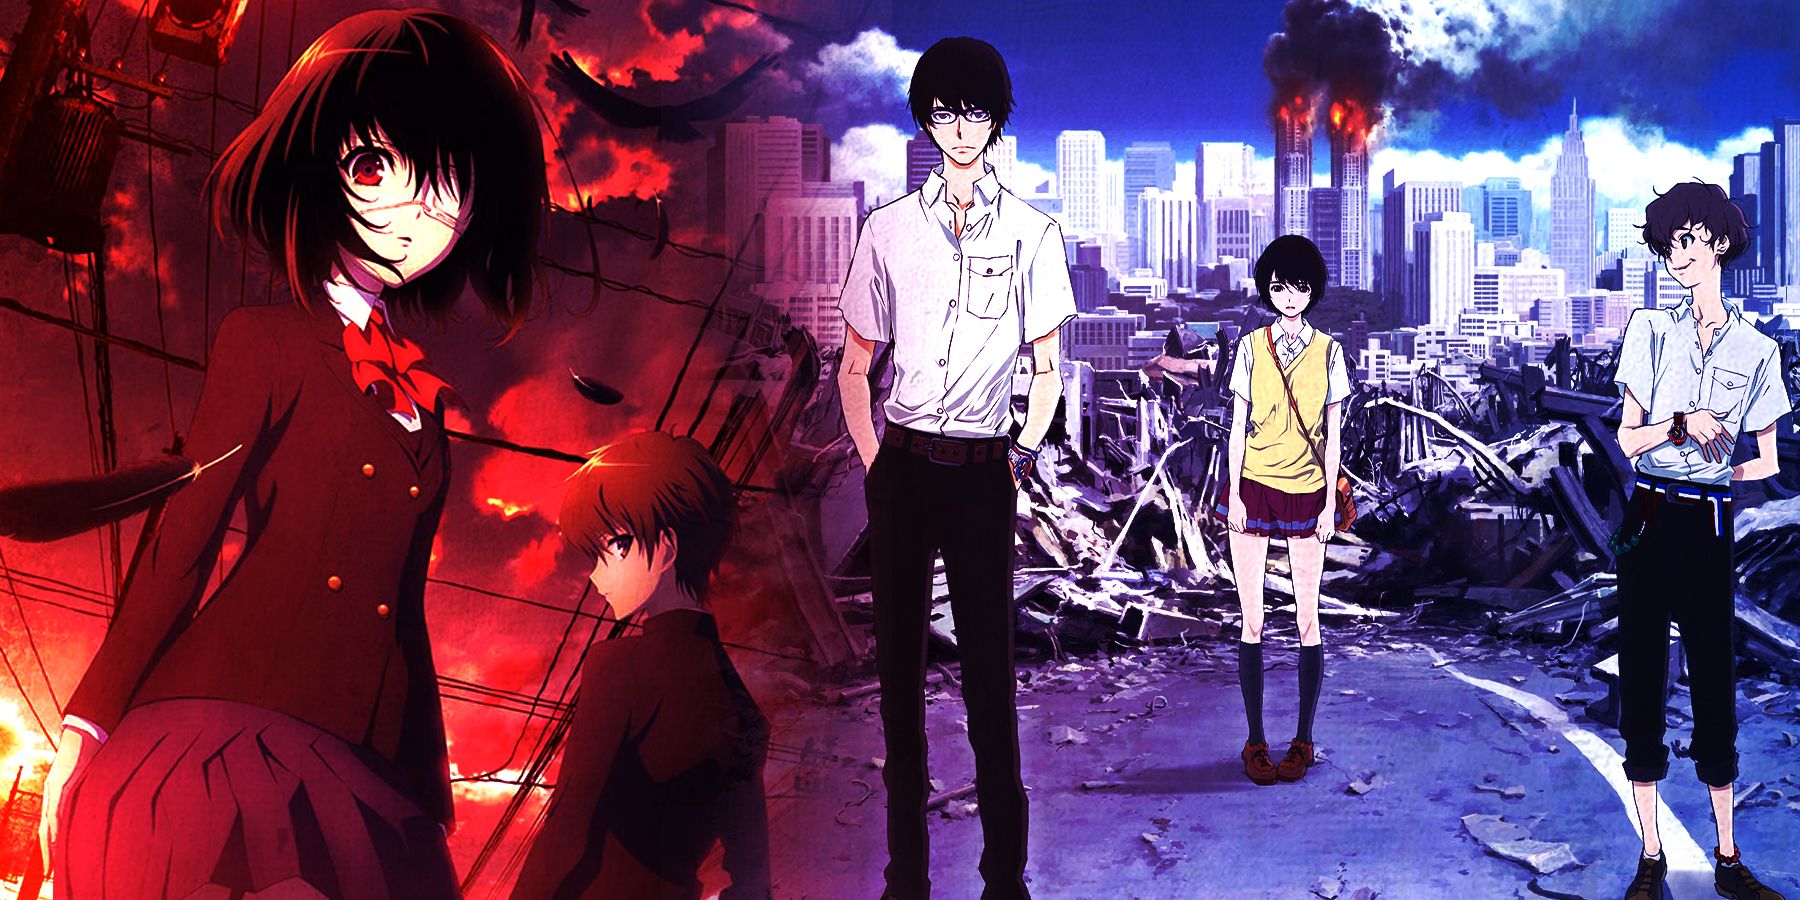 35 Of The Most Dark Anime Series That Will Amaze You